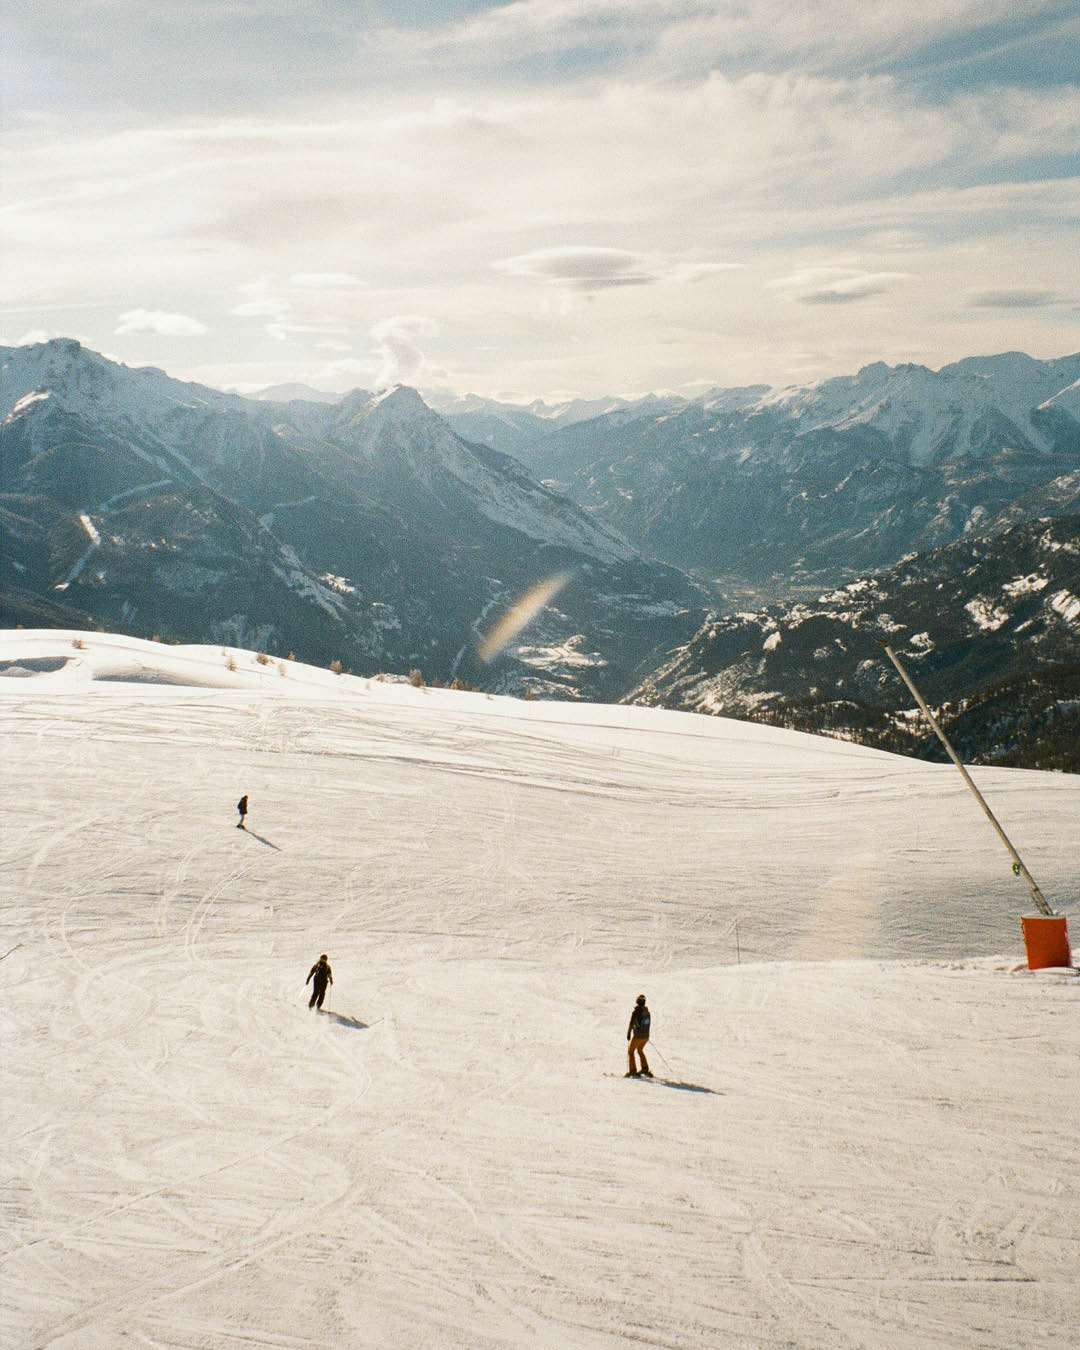 Skiers on the piste in the French Alps. Photo: Daniel Koponyas